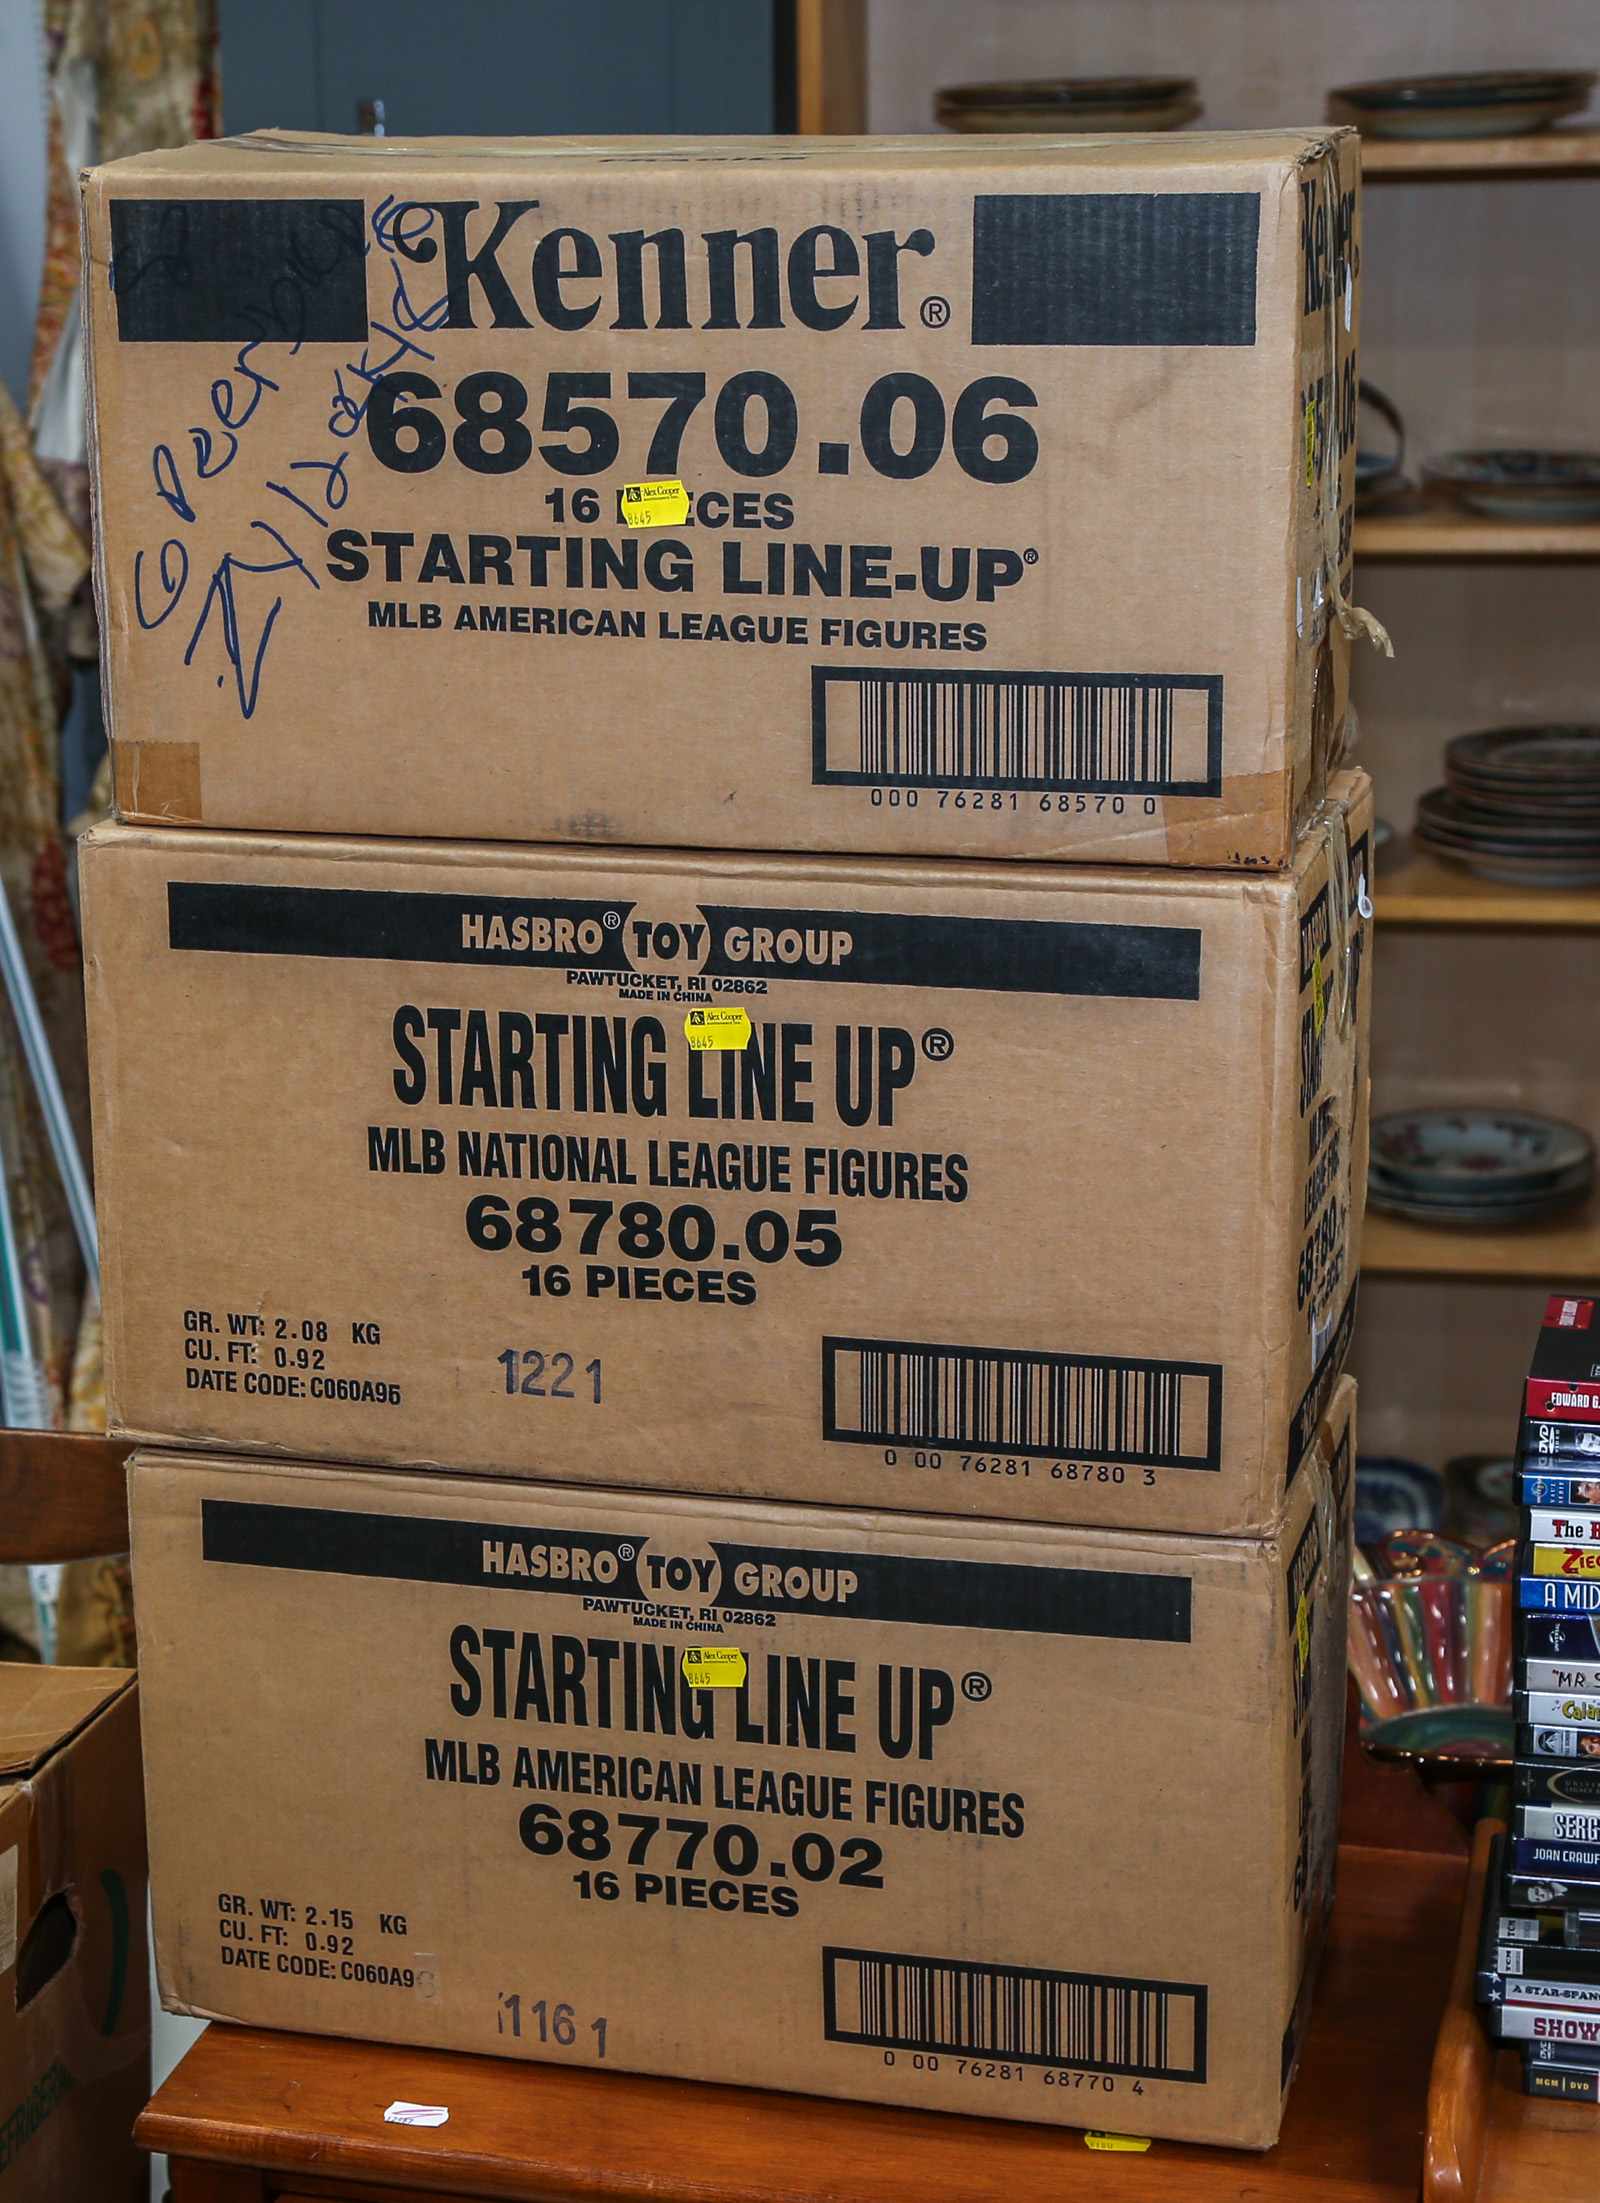 THREE BOXES OF STARTING LINE UP